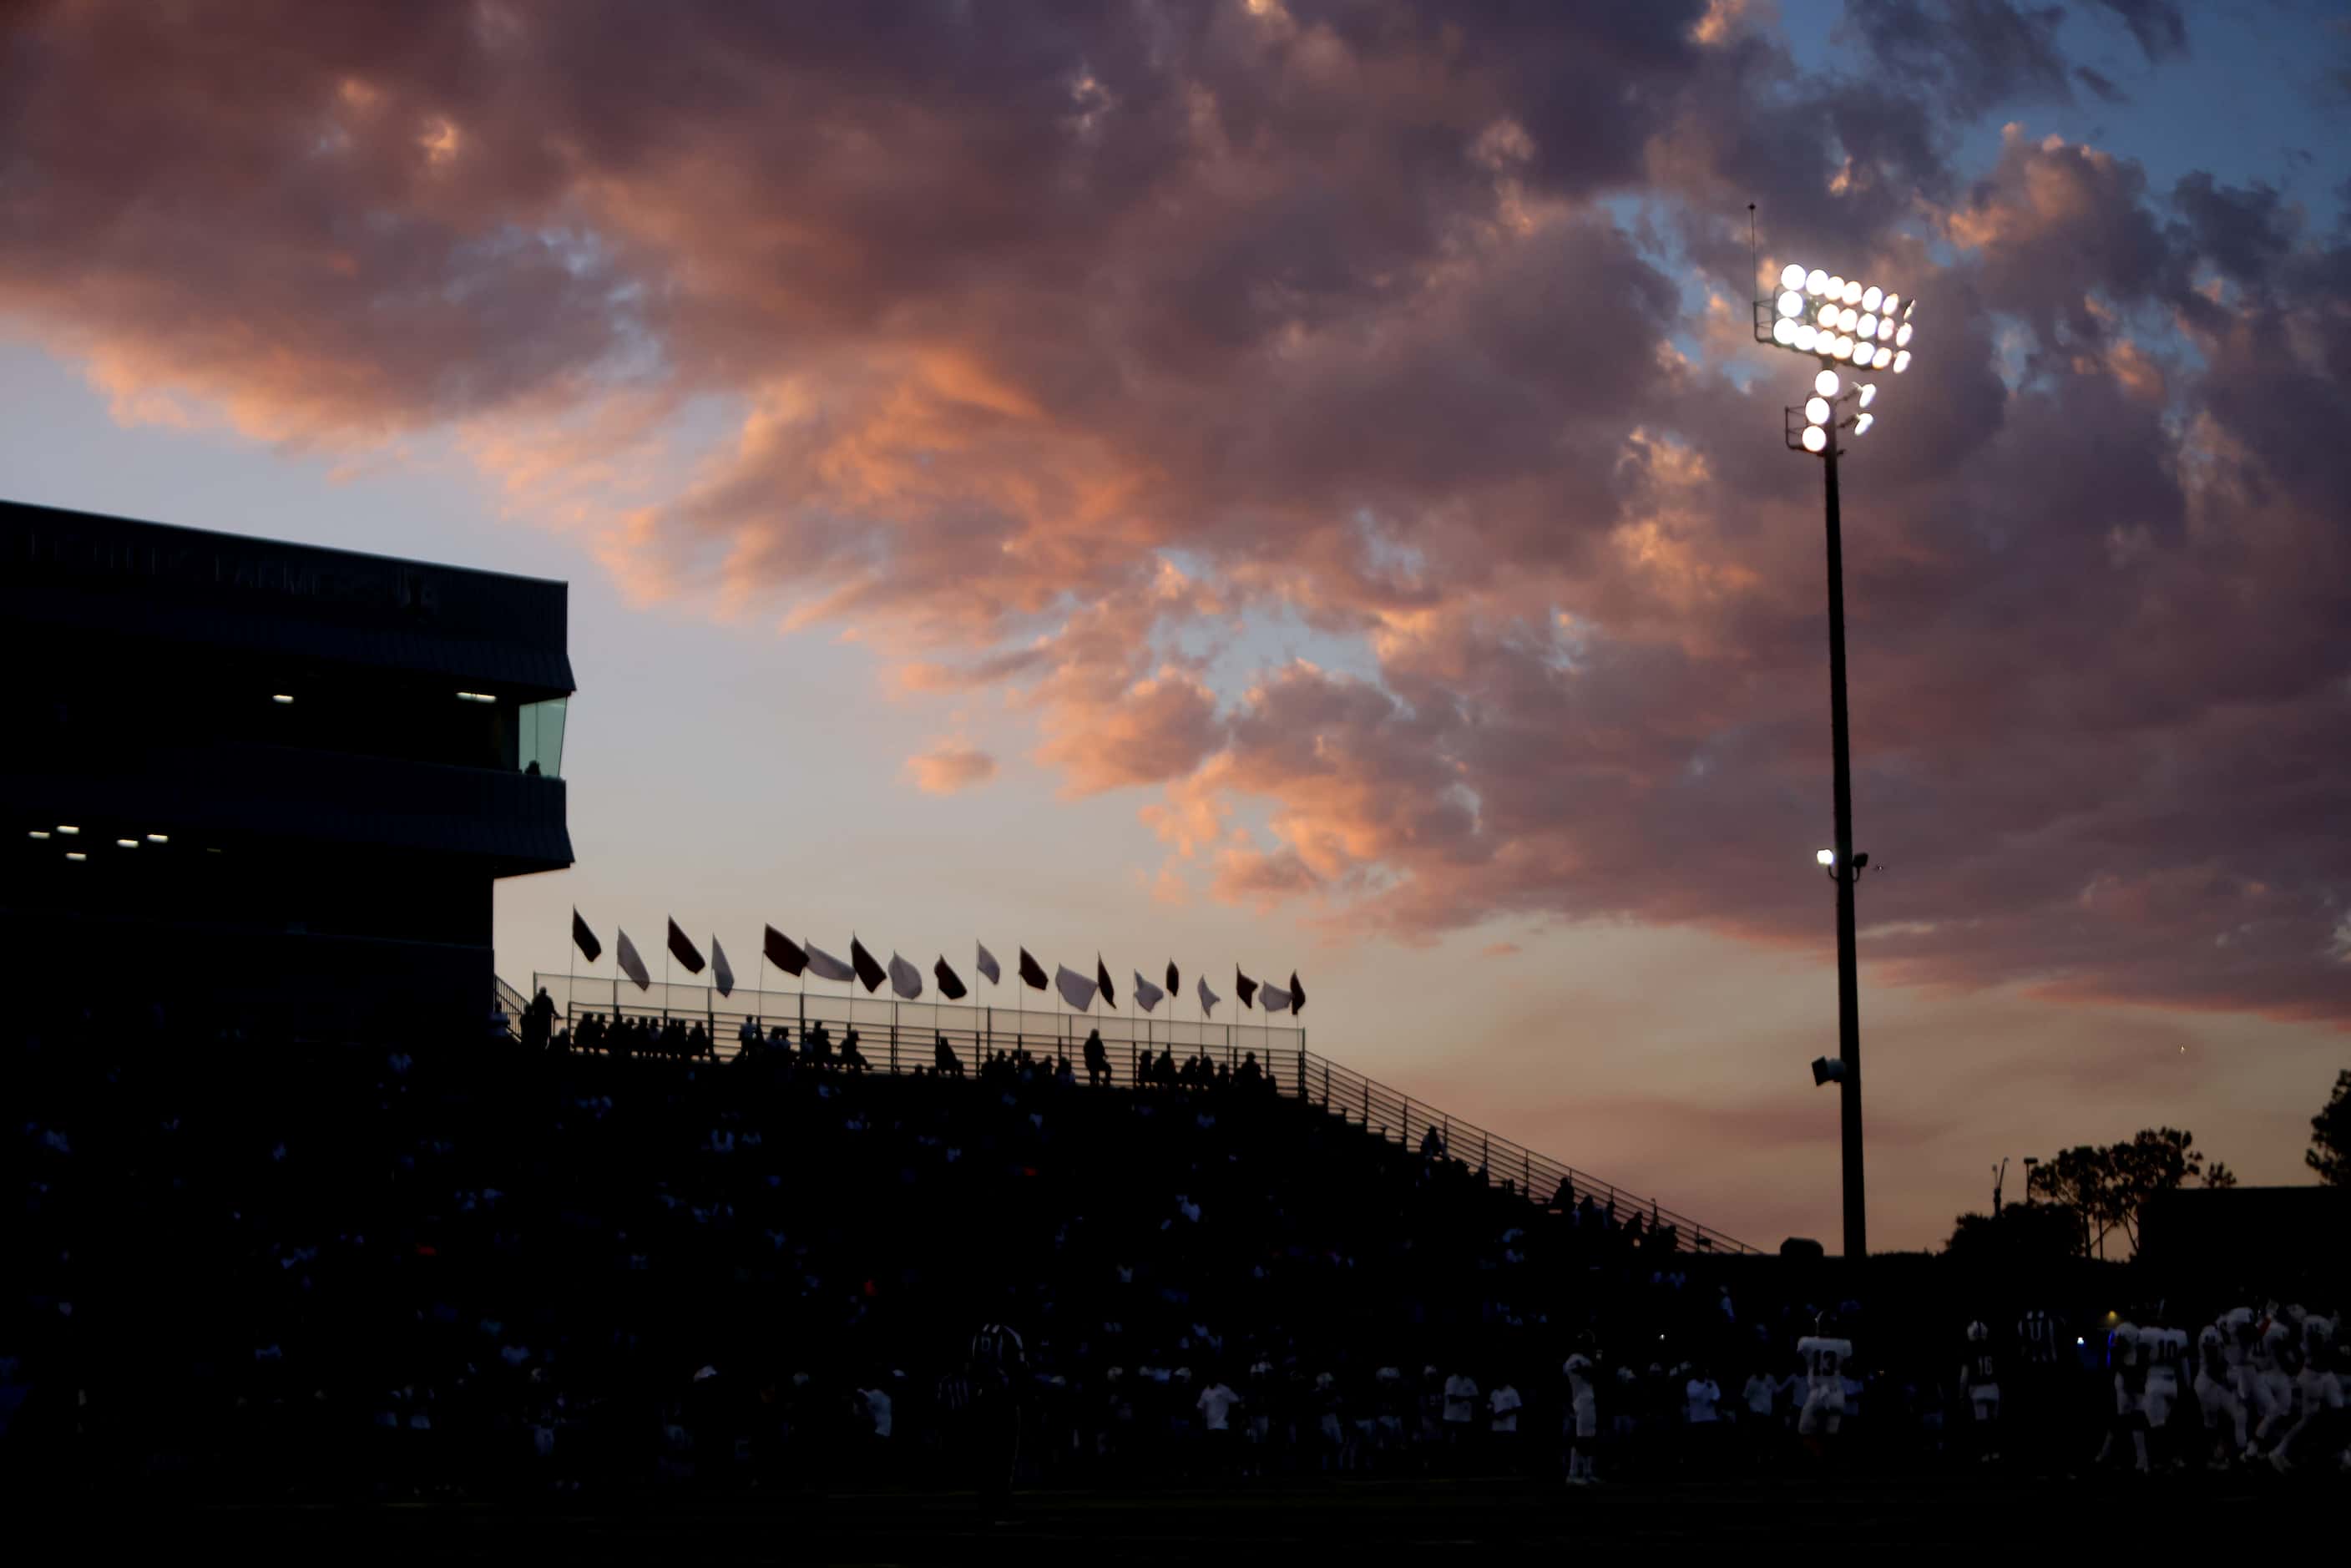 A setting sun illuminates clouds as a backdrop for a capacity crowd in attendance in the...